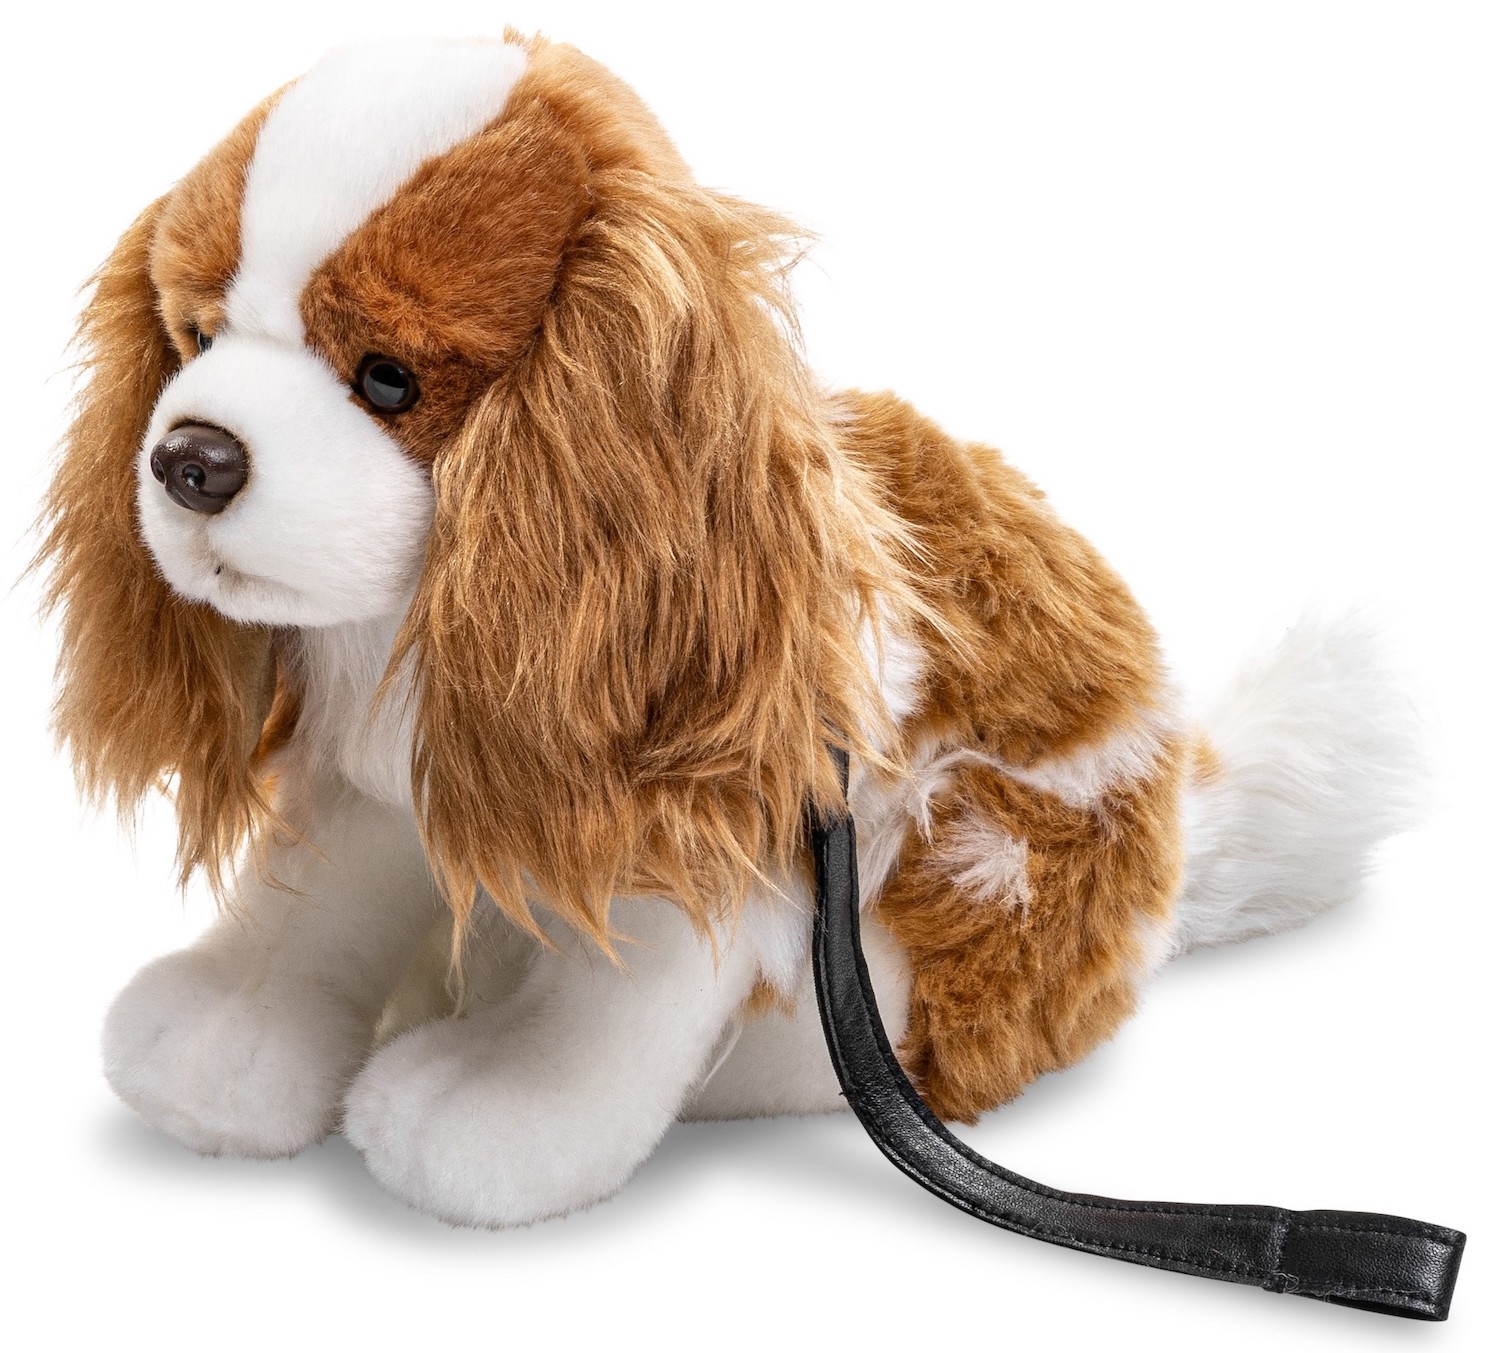 Uni-Toys - cocker spaniel brown-white, sitting - With collar and leash - 23 cm (height) - Plush dog - Plush toy, cuddly toy